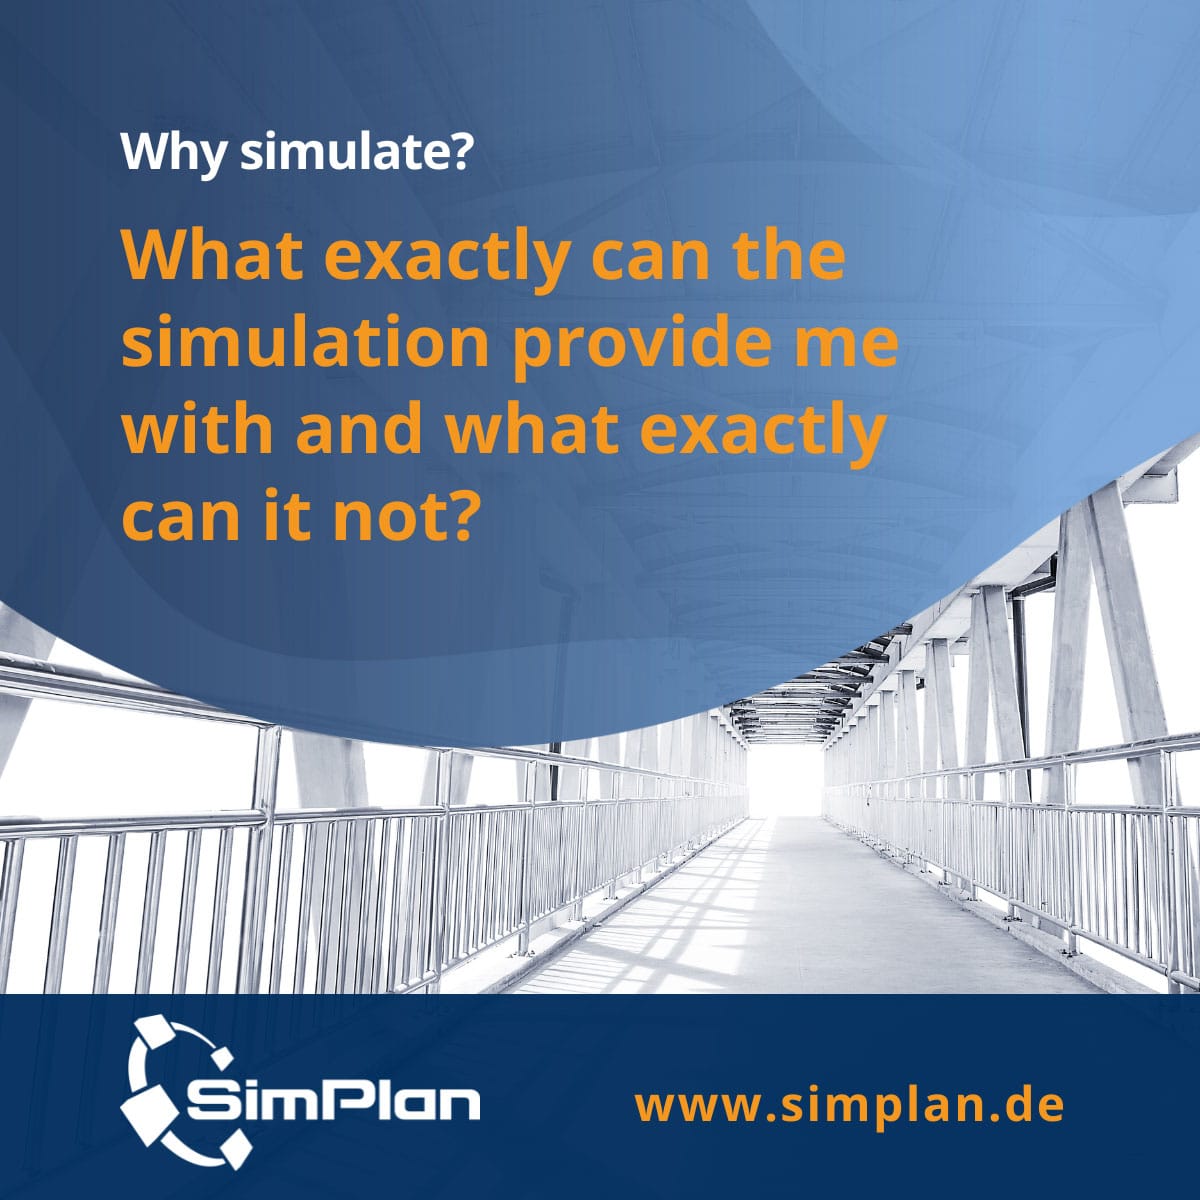 Why_simulate_8_what_can_simulation_provide